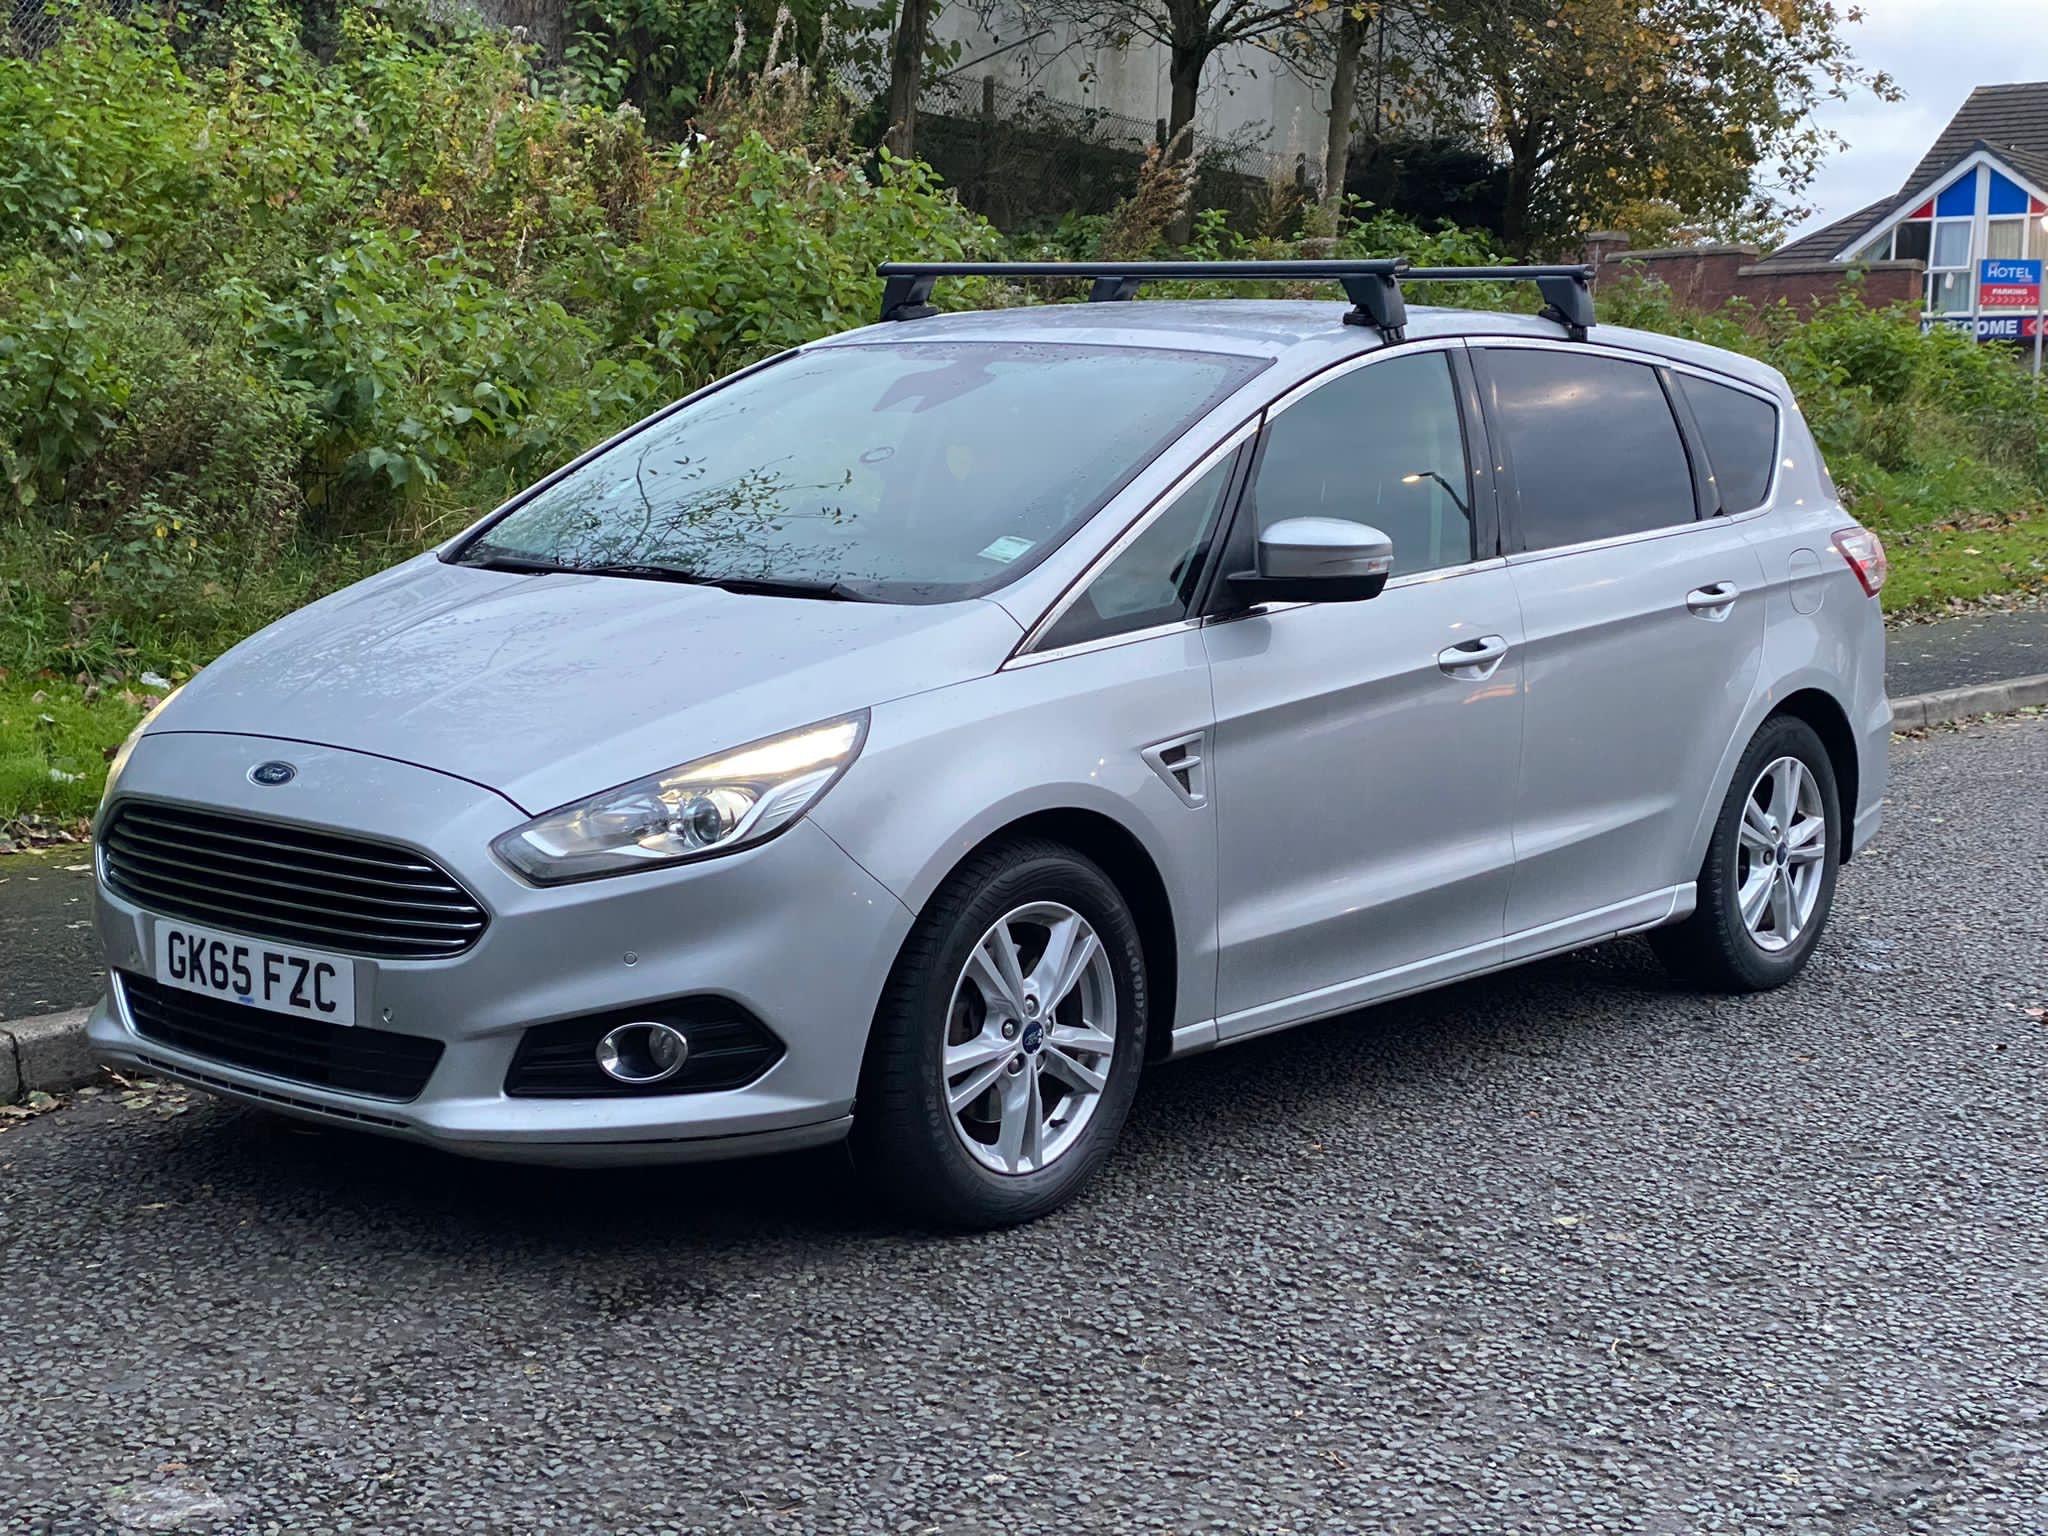 2015 Ford S-Max Mk 2 v outgoing S-Max